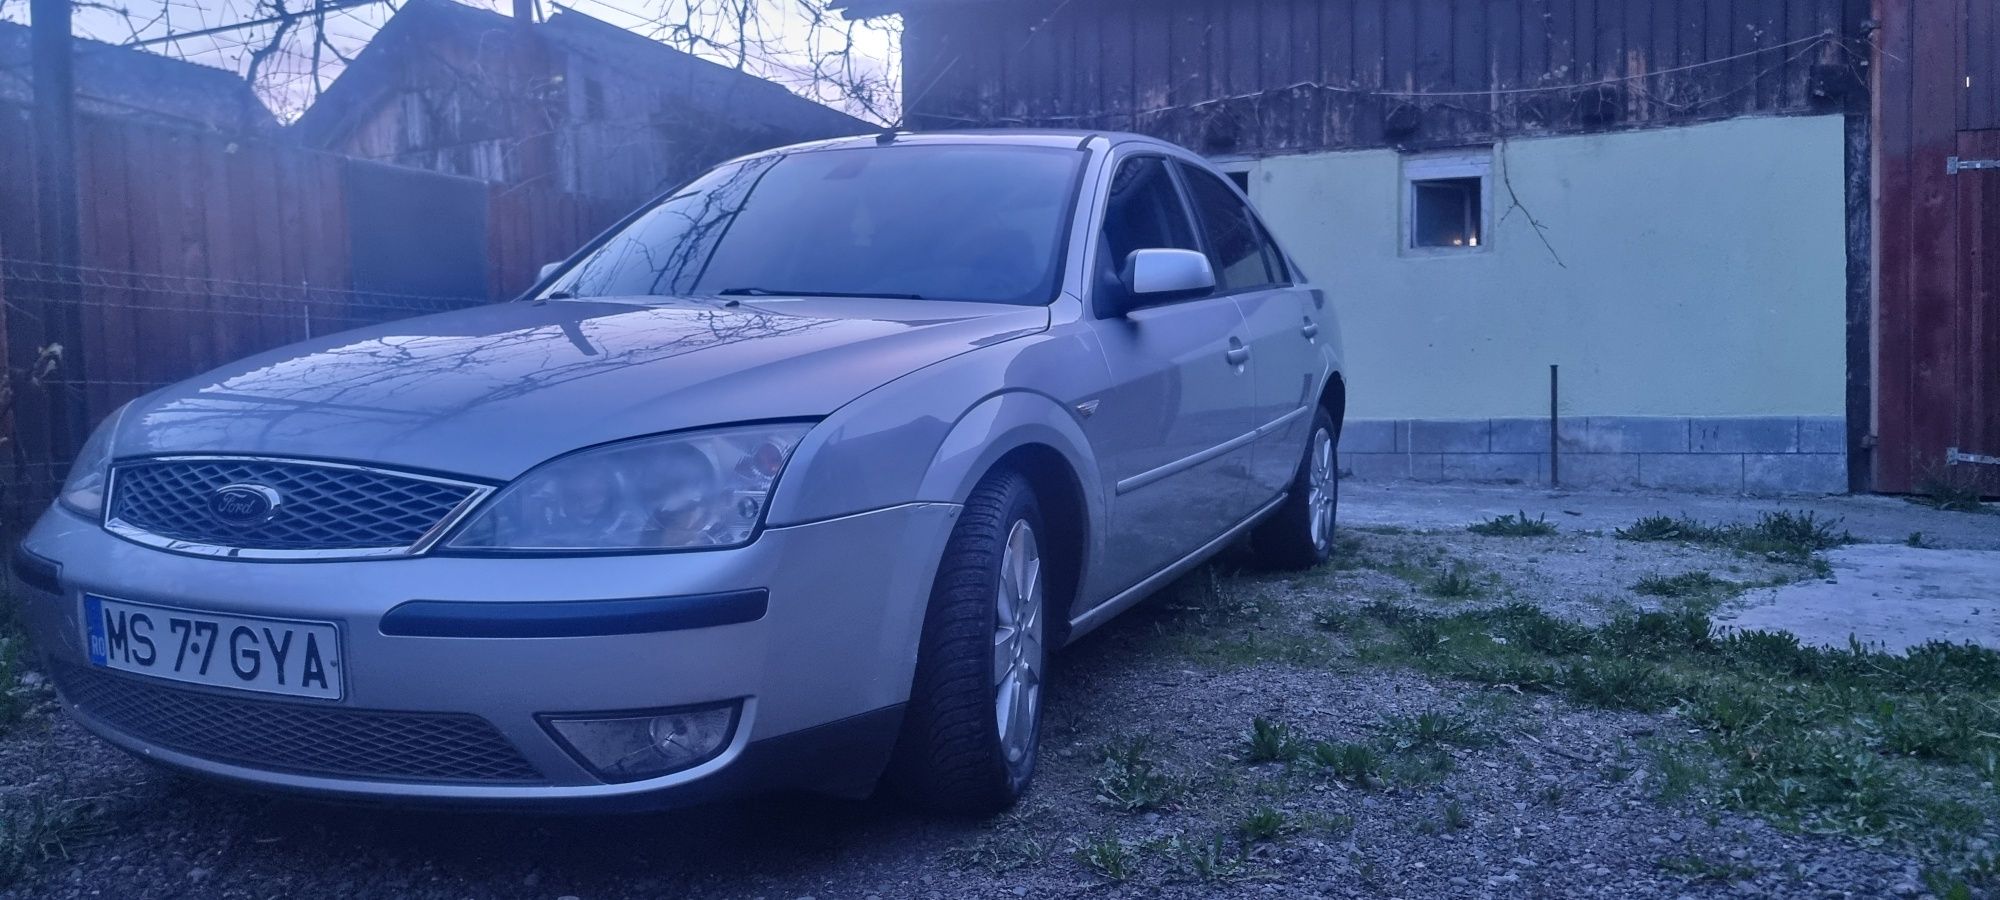 Ford mondeo 2007